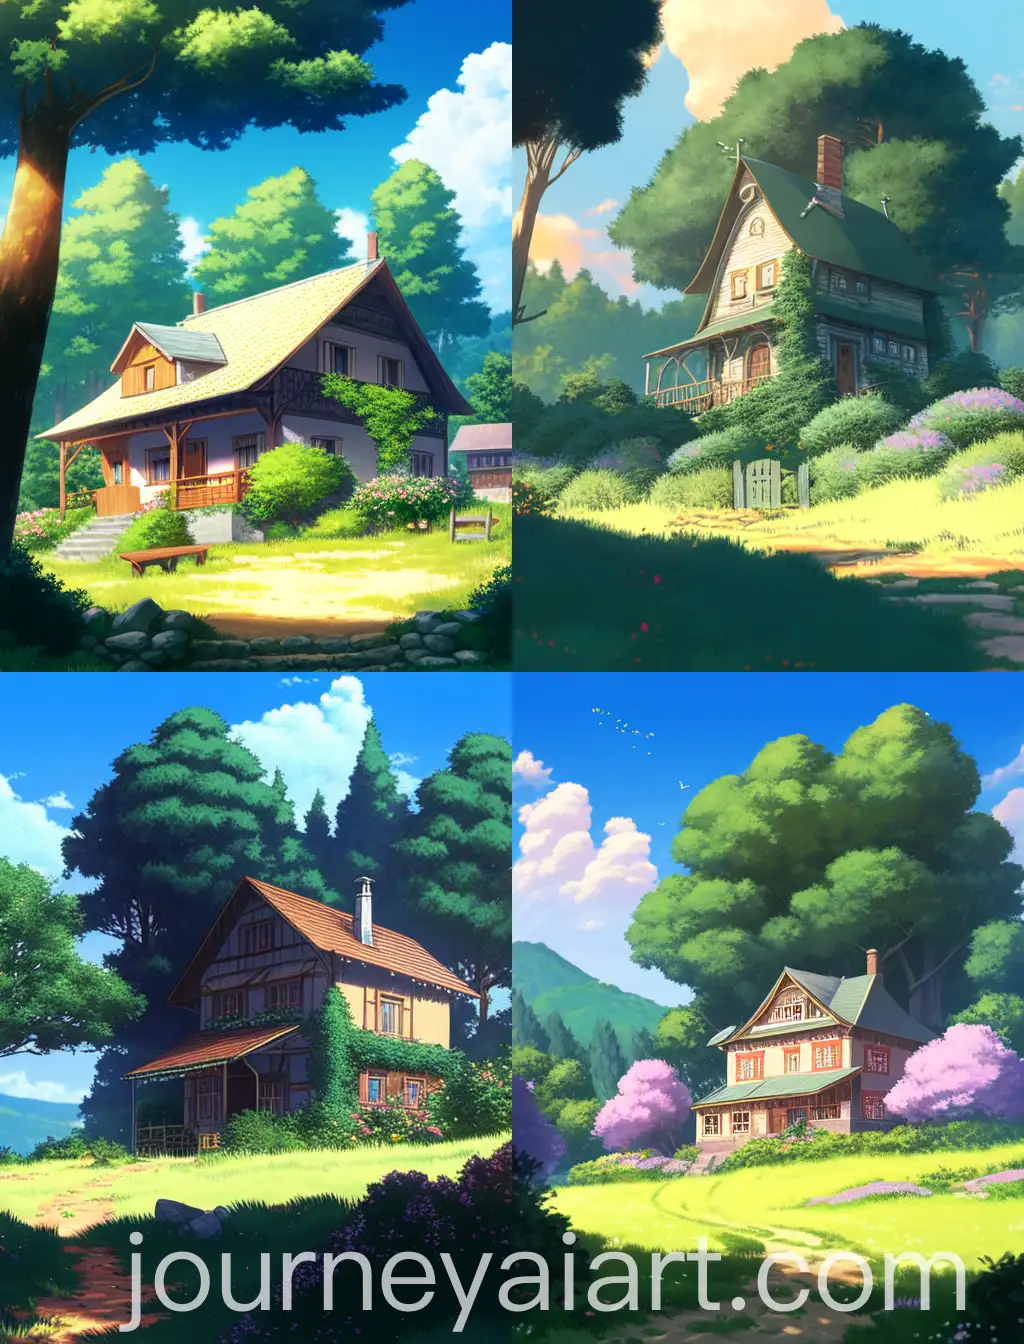 Cozy-Home-Near-Hill-with-Tall-Trees-on-Sunny-Day-Studio-Ghibli-Inspired-Art